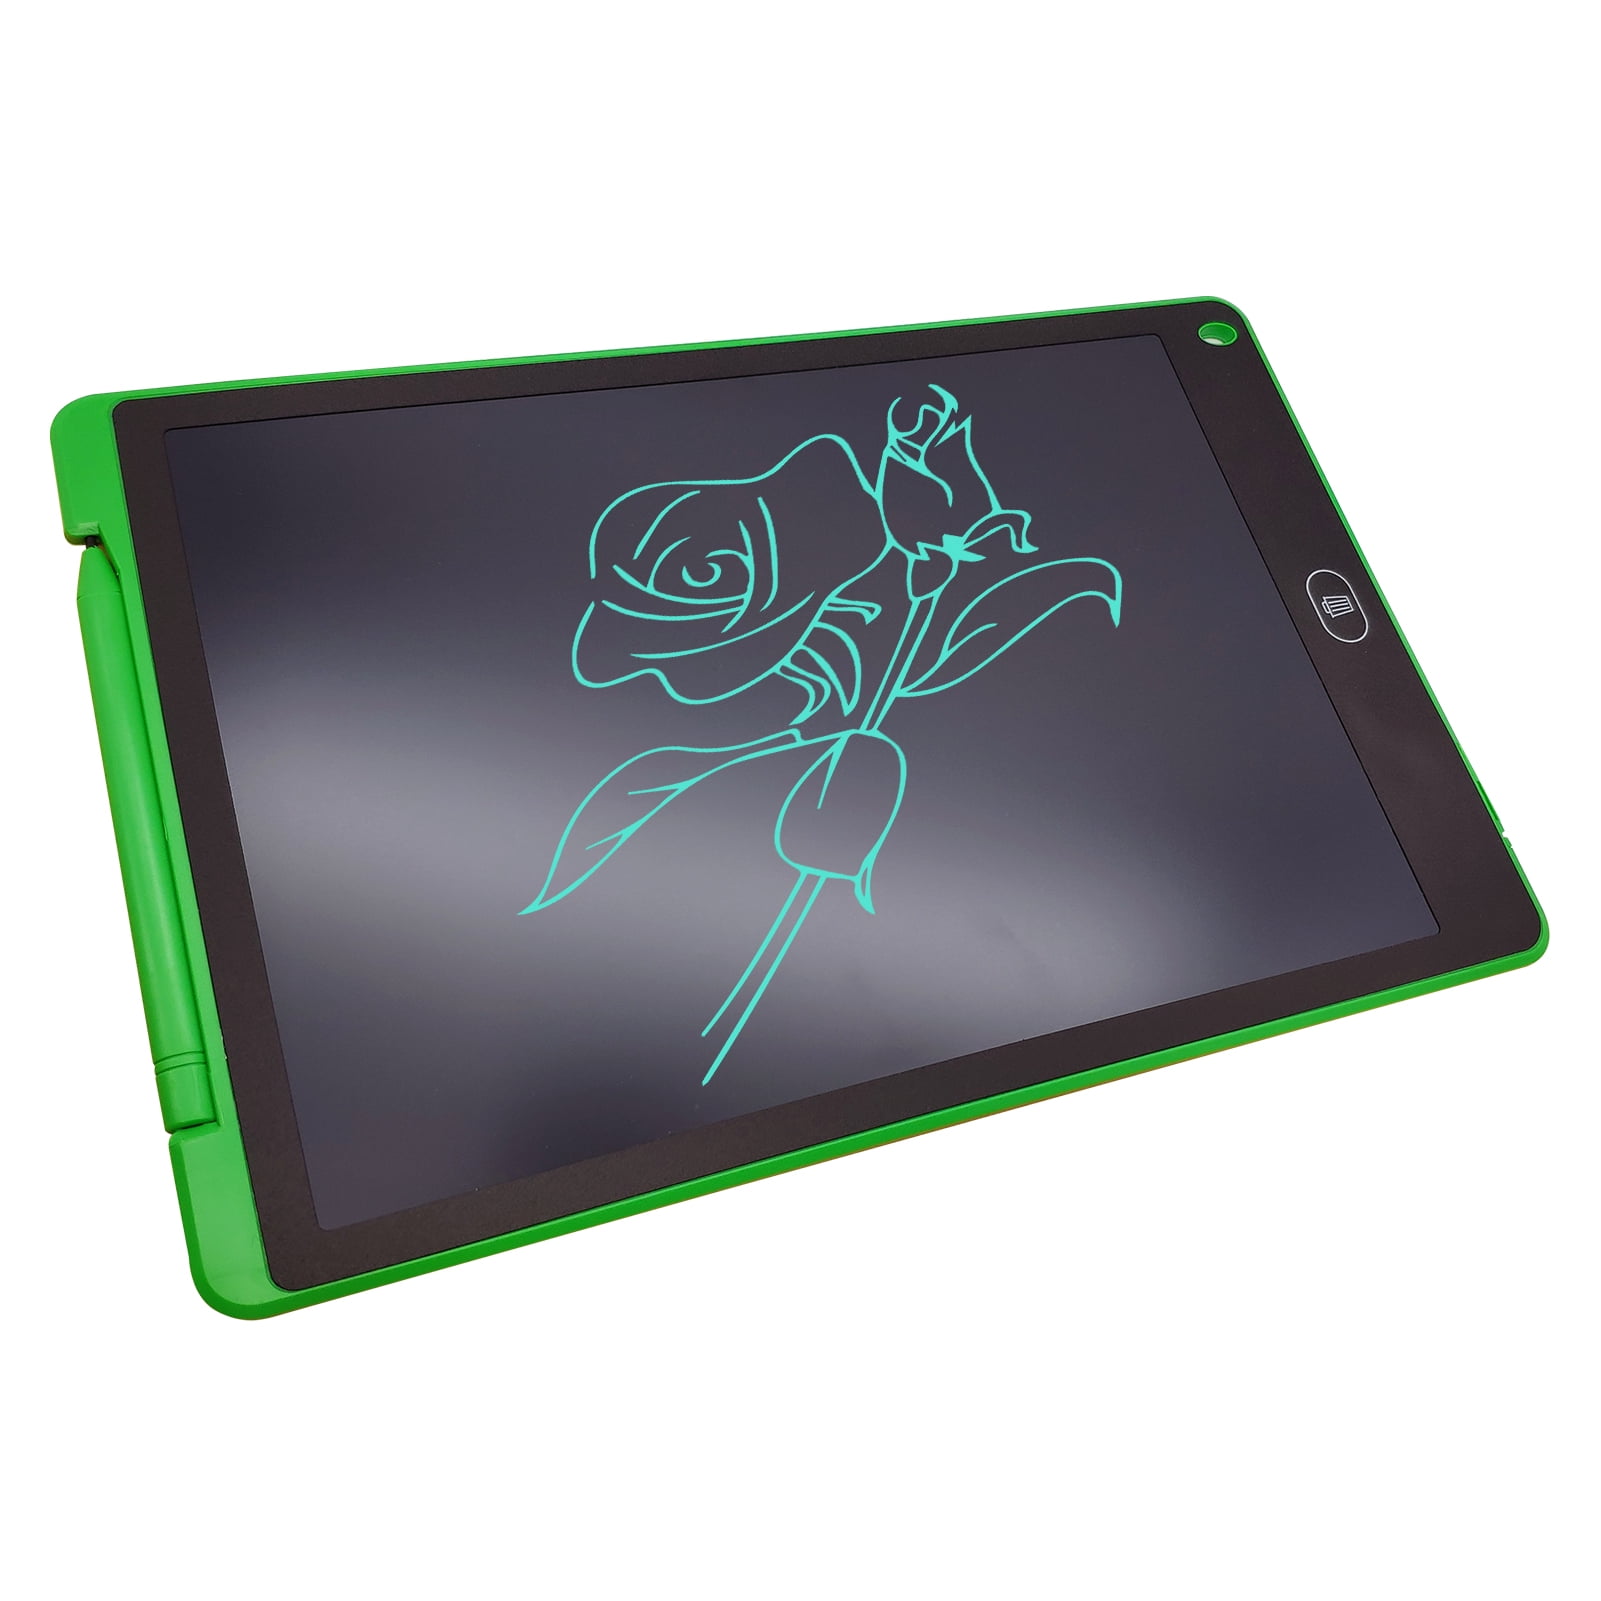 INSITE Electronic Drawing Board LCD colorful Screen Writing Handwriting Pad  Digital Graphic Tablets with Pen Black writing pad